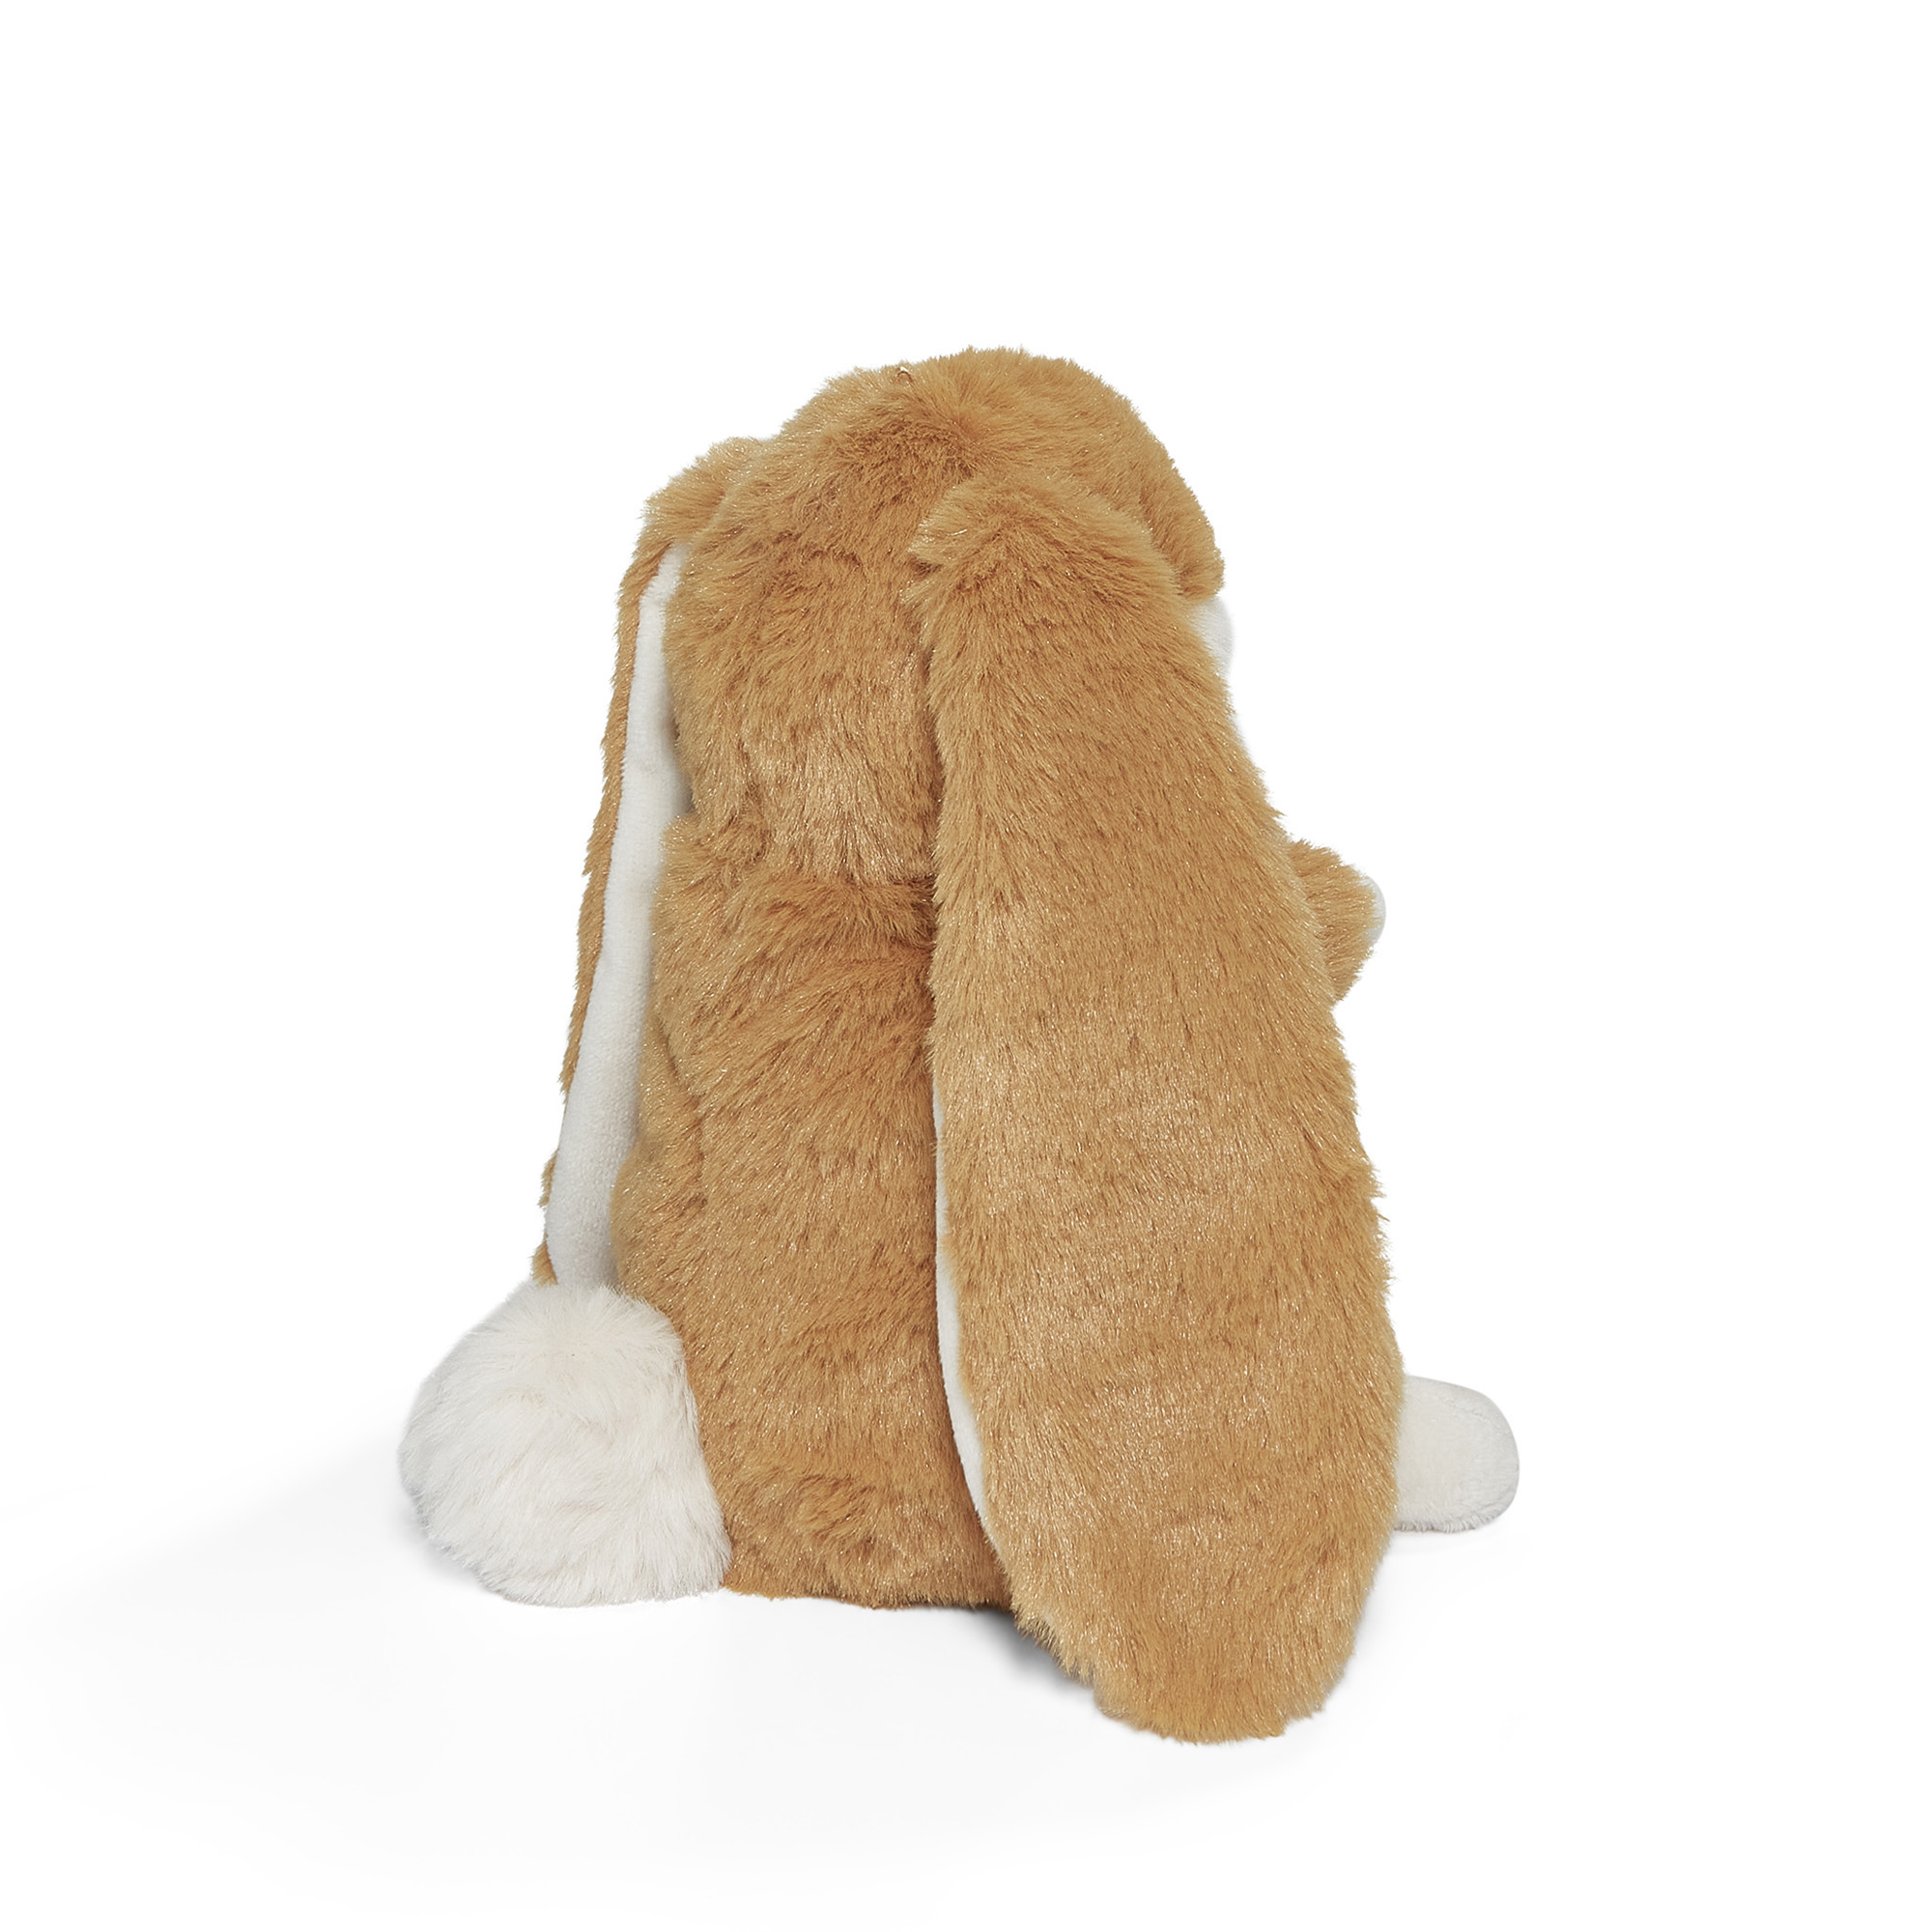 Peluche tiny nibble marigold 20cm - Bunnies By The Bay